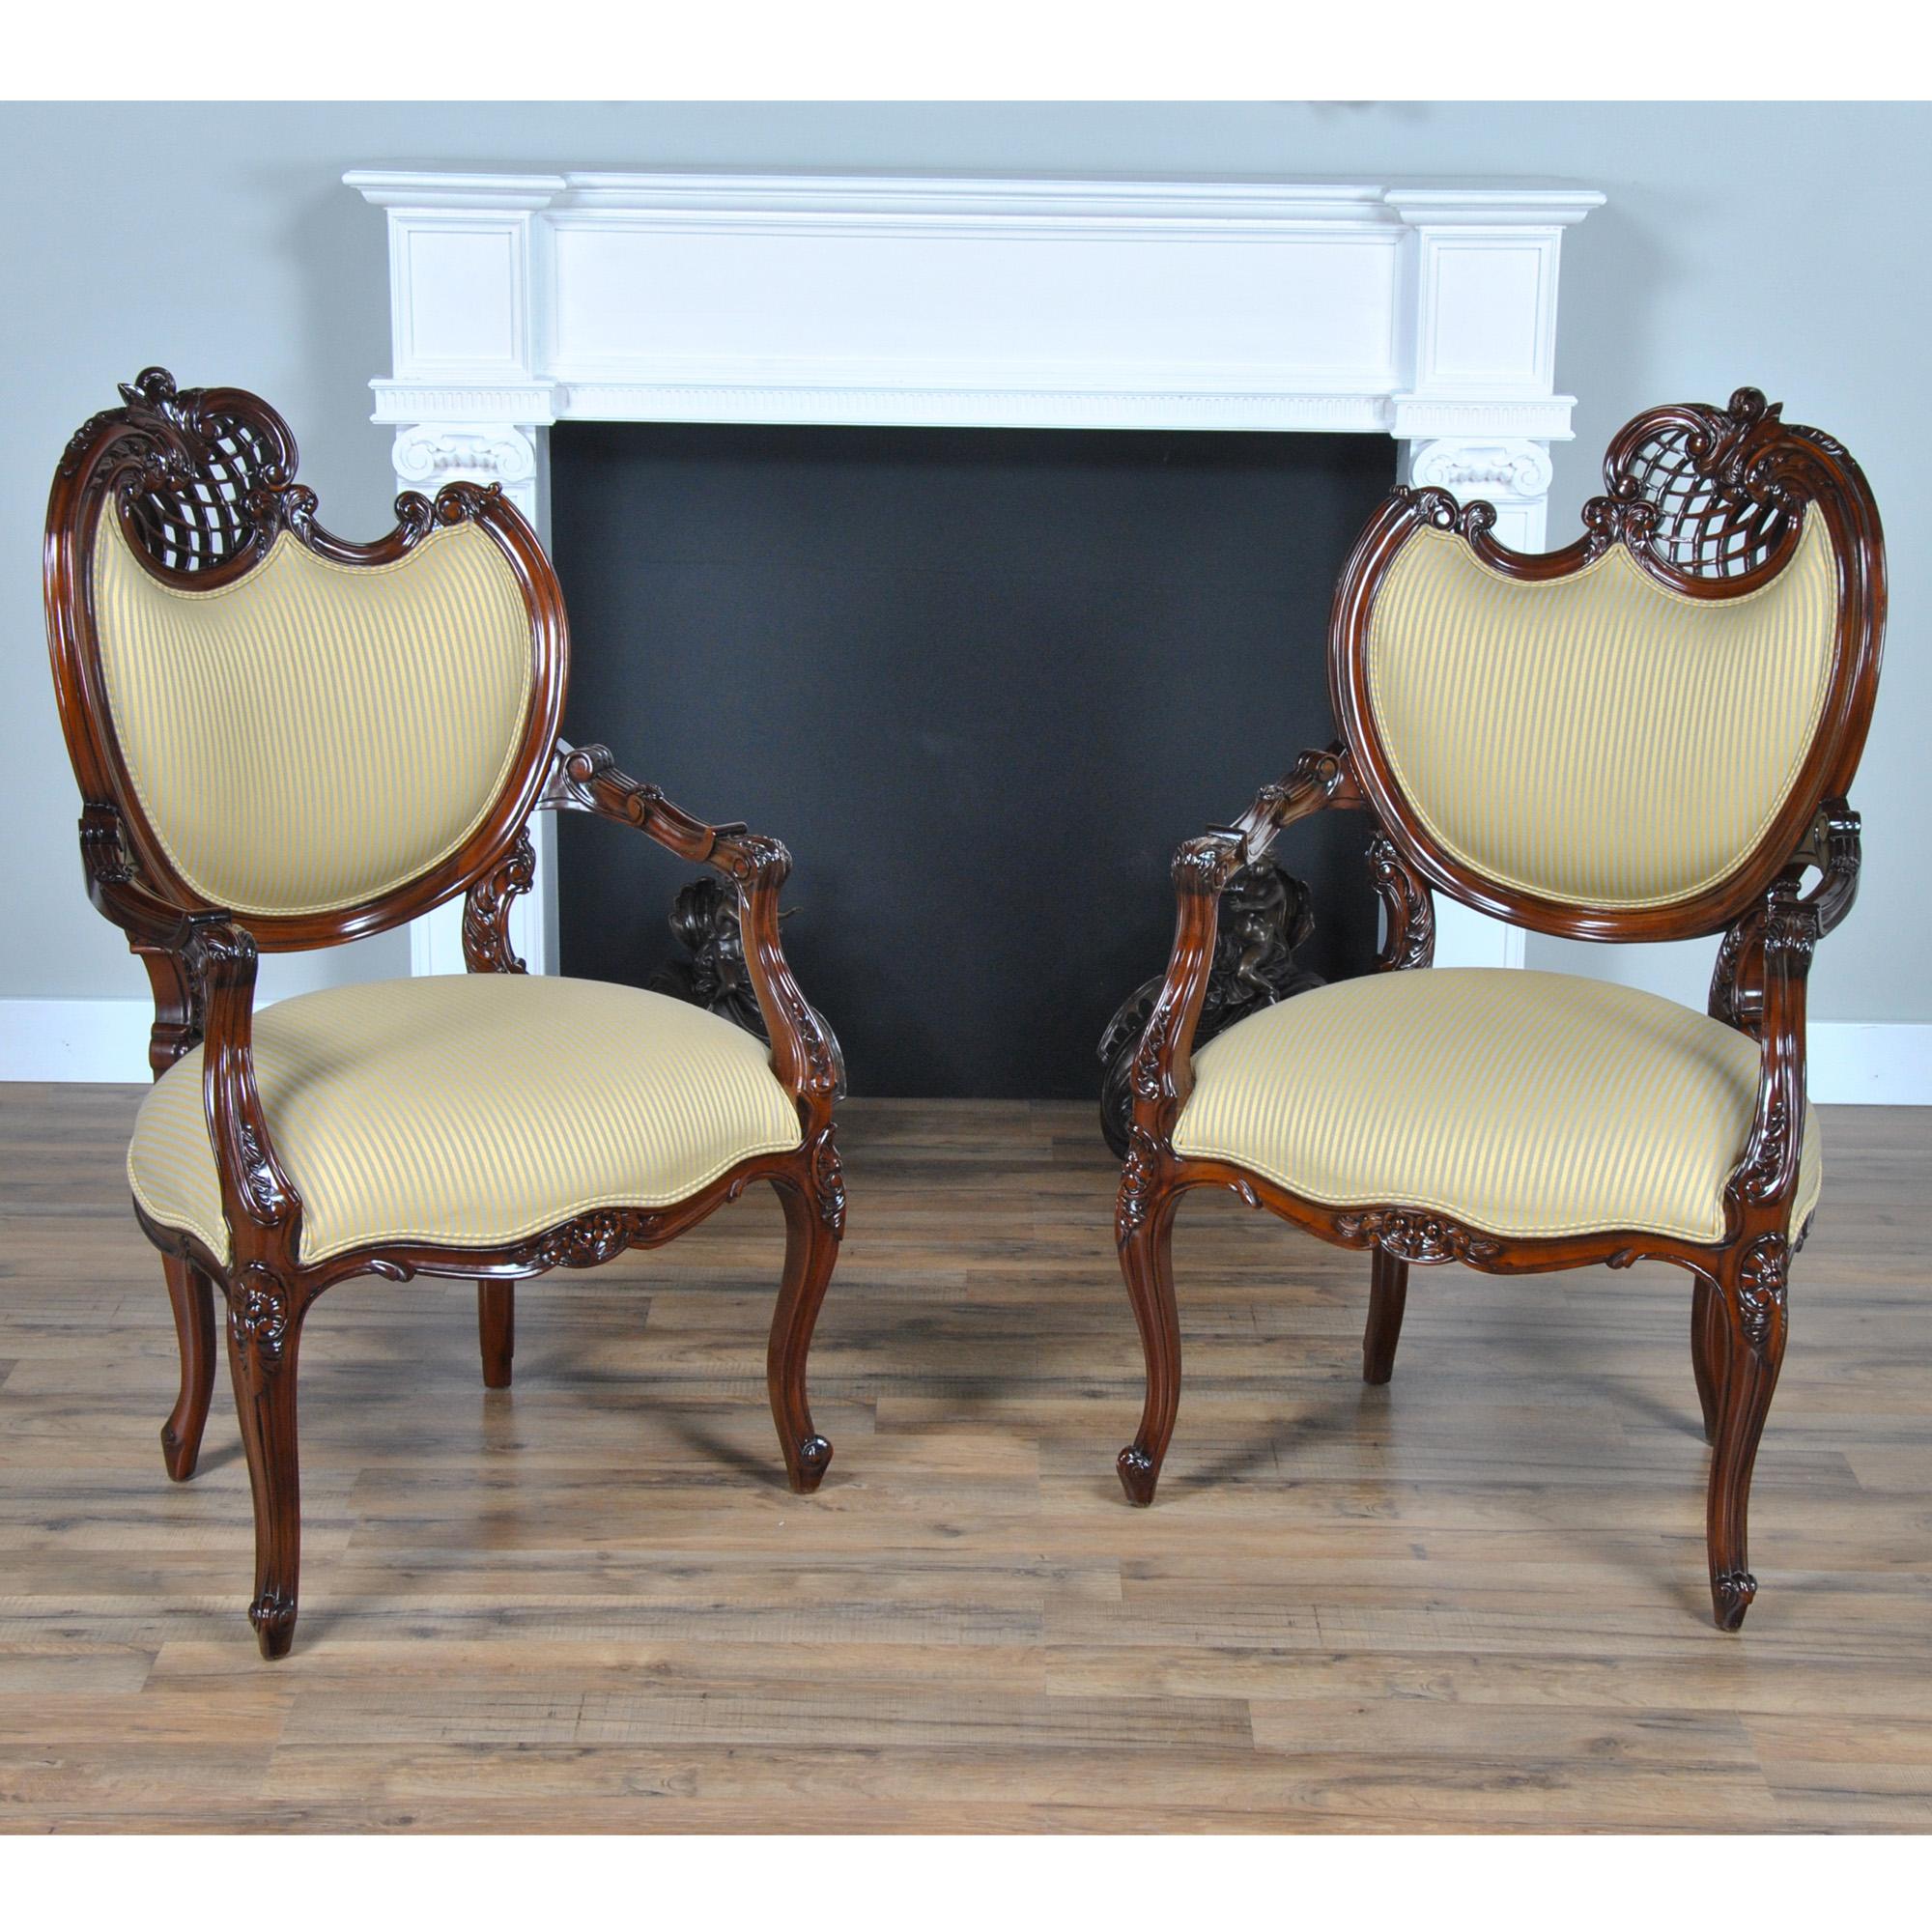 The Right Fireside Chair is a French style living room chair with an asymmetrical back, the higher side of the chair being on a persons right side when facing the chair from the front side. This version of a fireside chair is completely hand carved